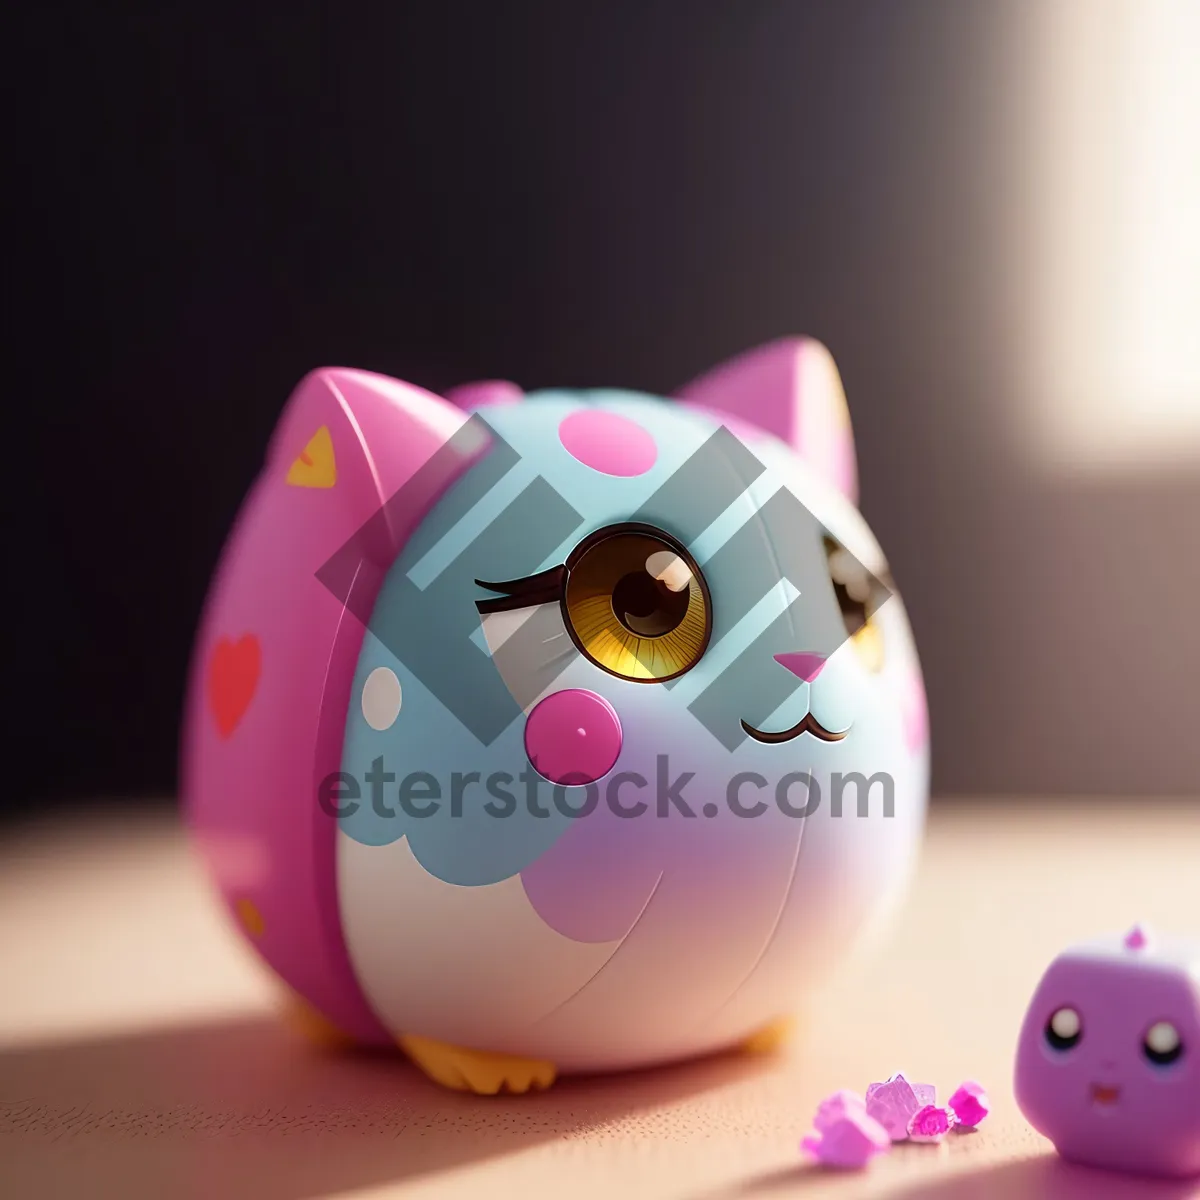 Picture of Piggy Bank Savings: Pink Financial Investment Container